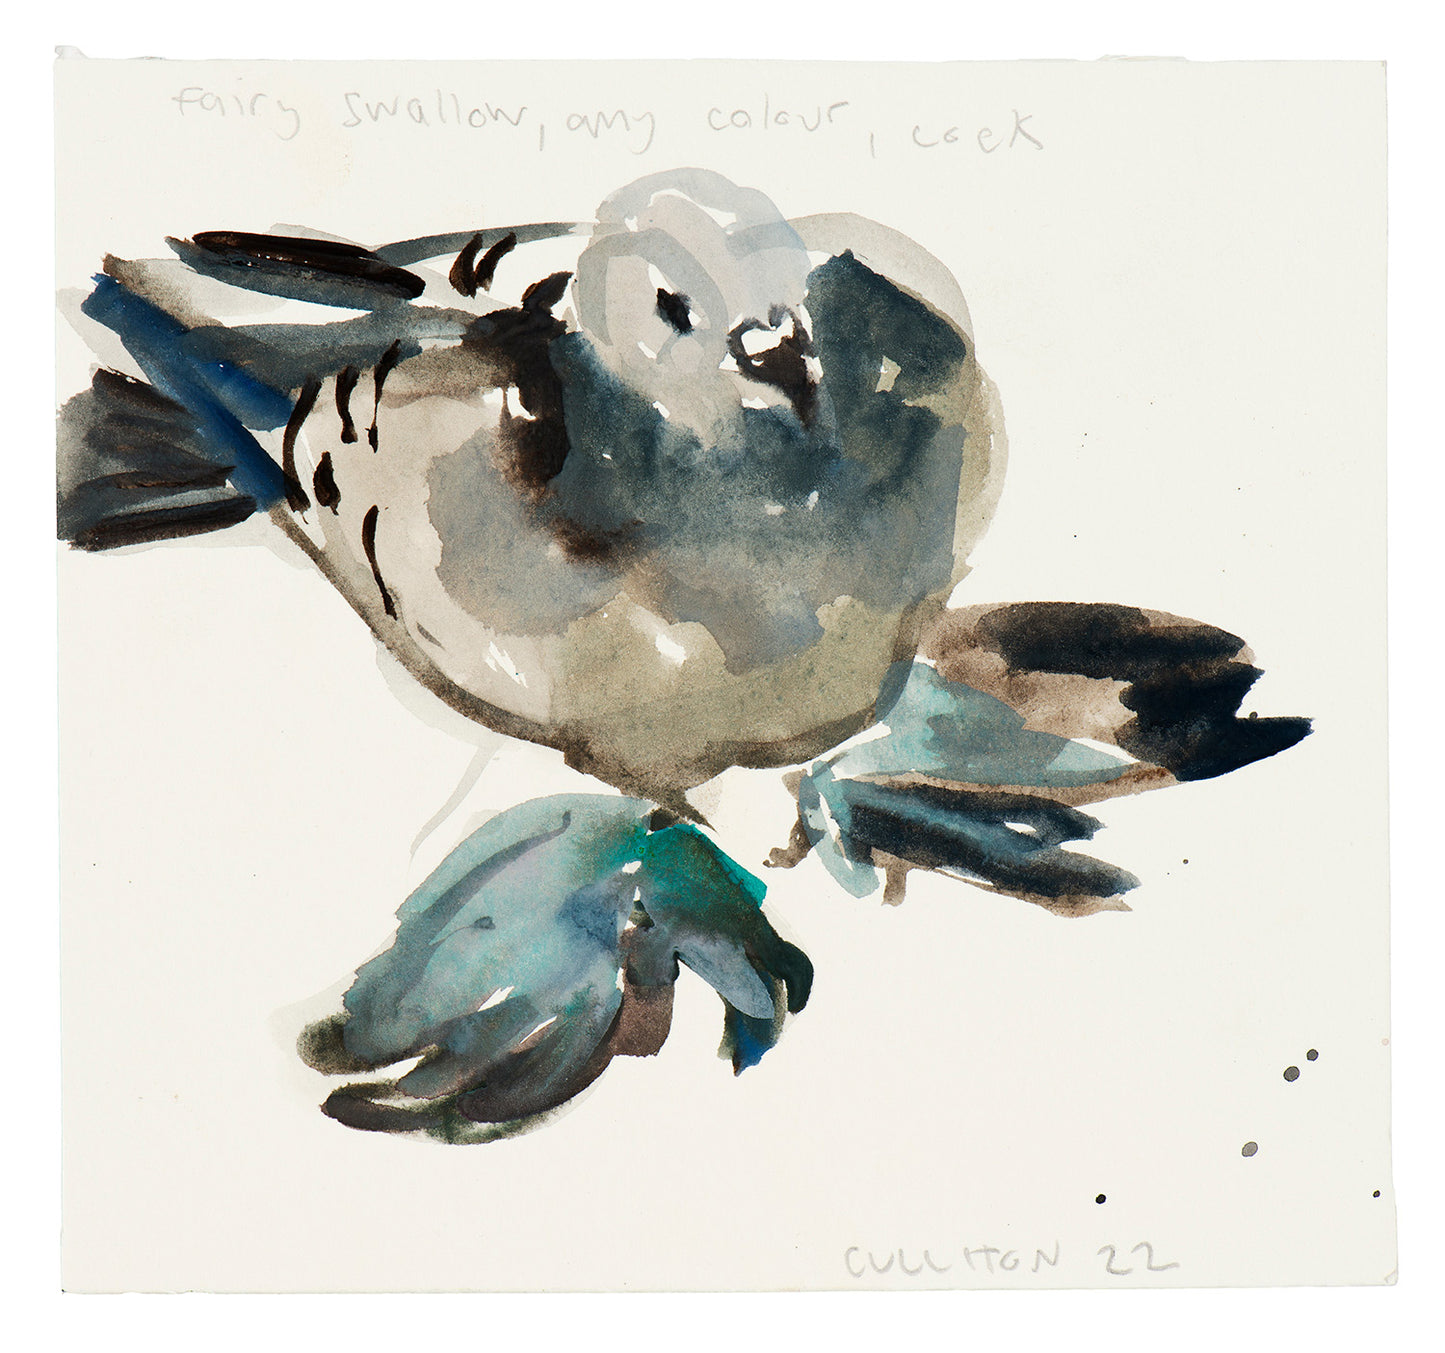 Lucy Culliton - Fairy Swallow Any Colour Cock